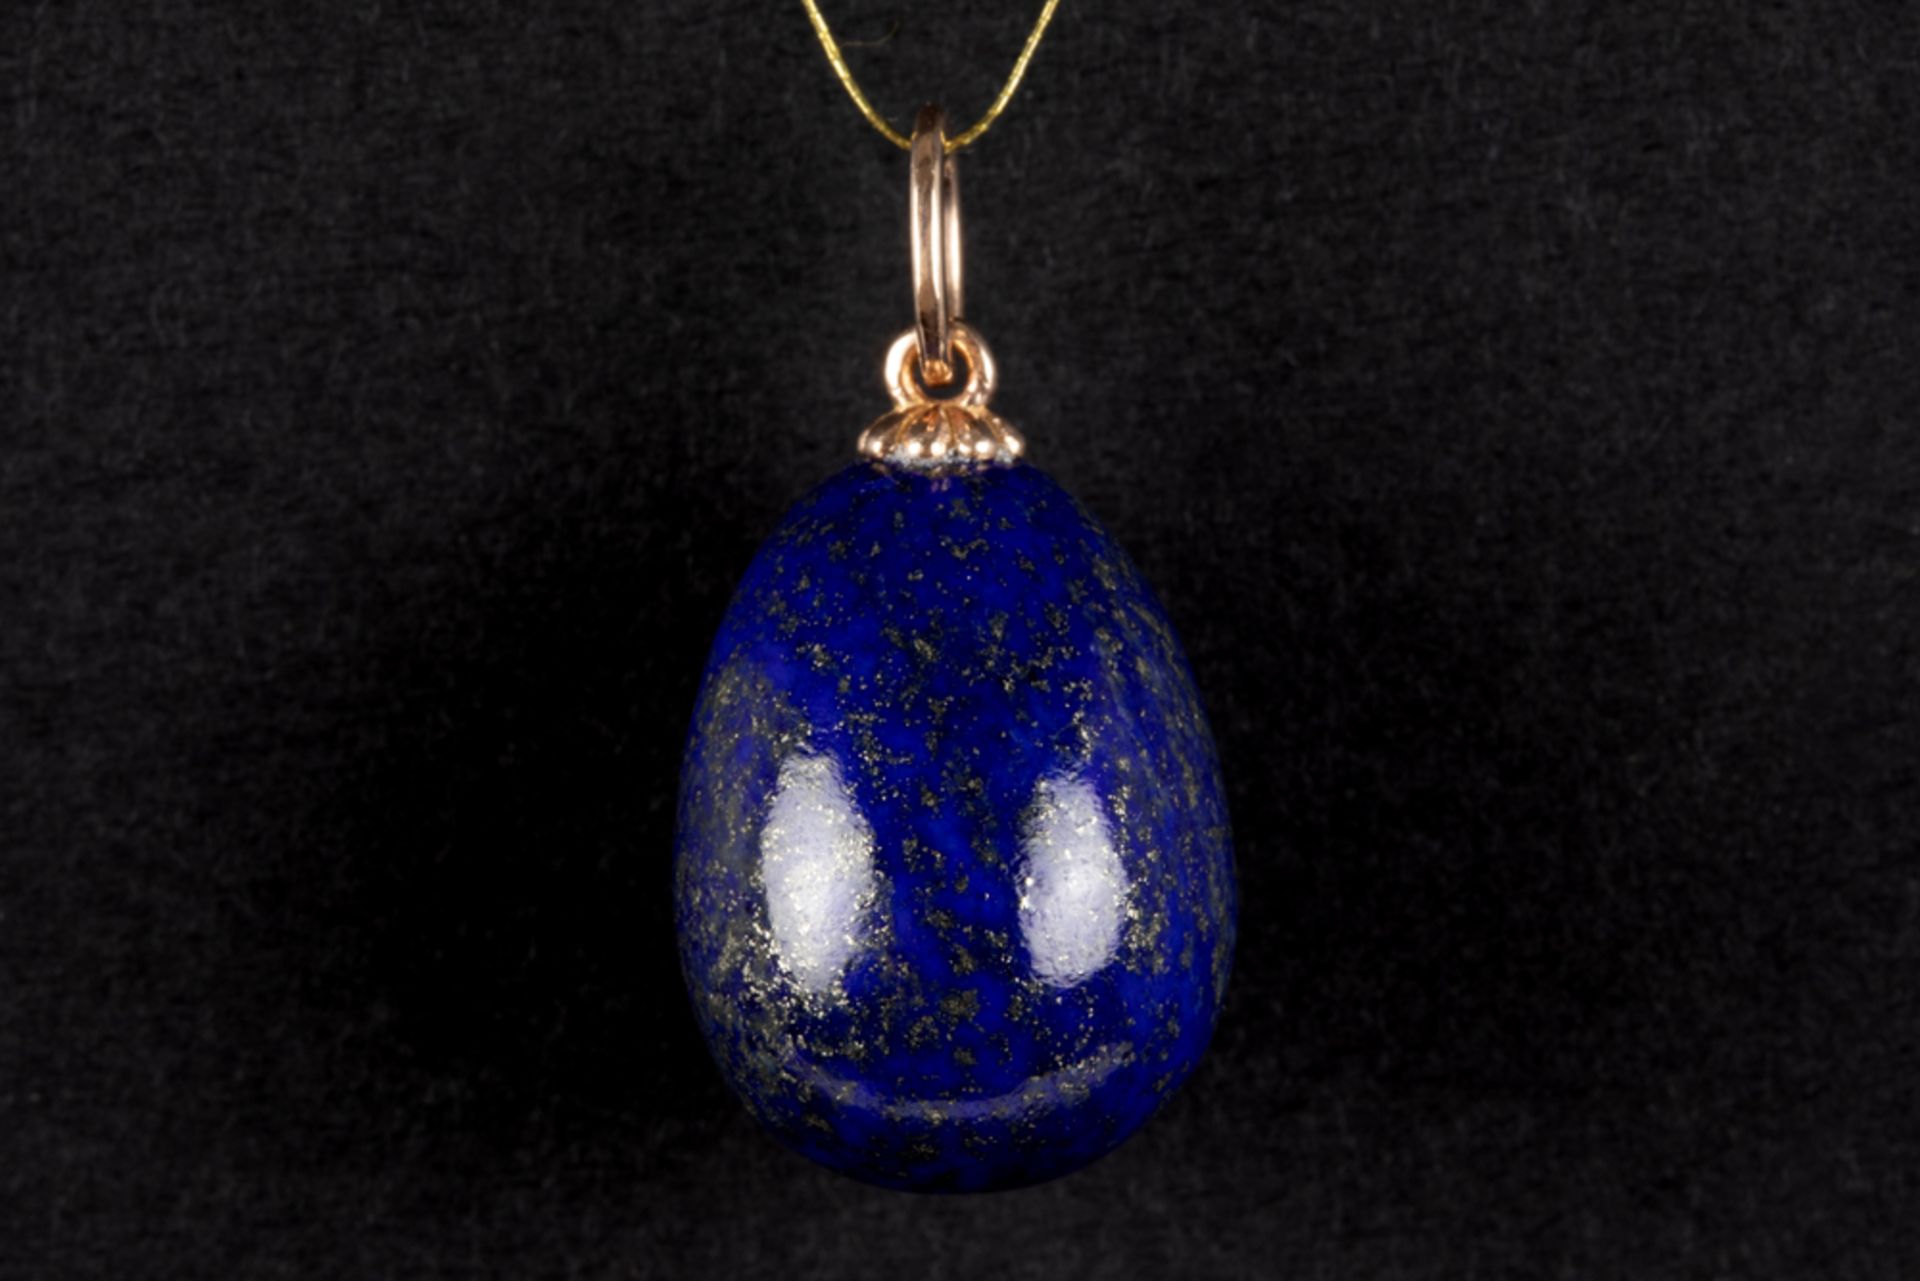 Russian egg-shaped pendant in "56" marked gold and lapis lazuli, incrusted with a cabochon cut - Image 2 of 2